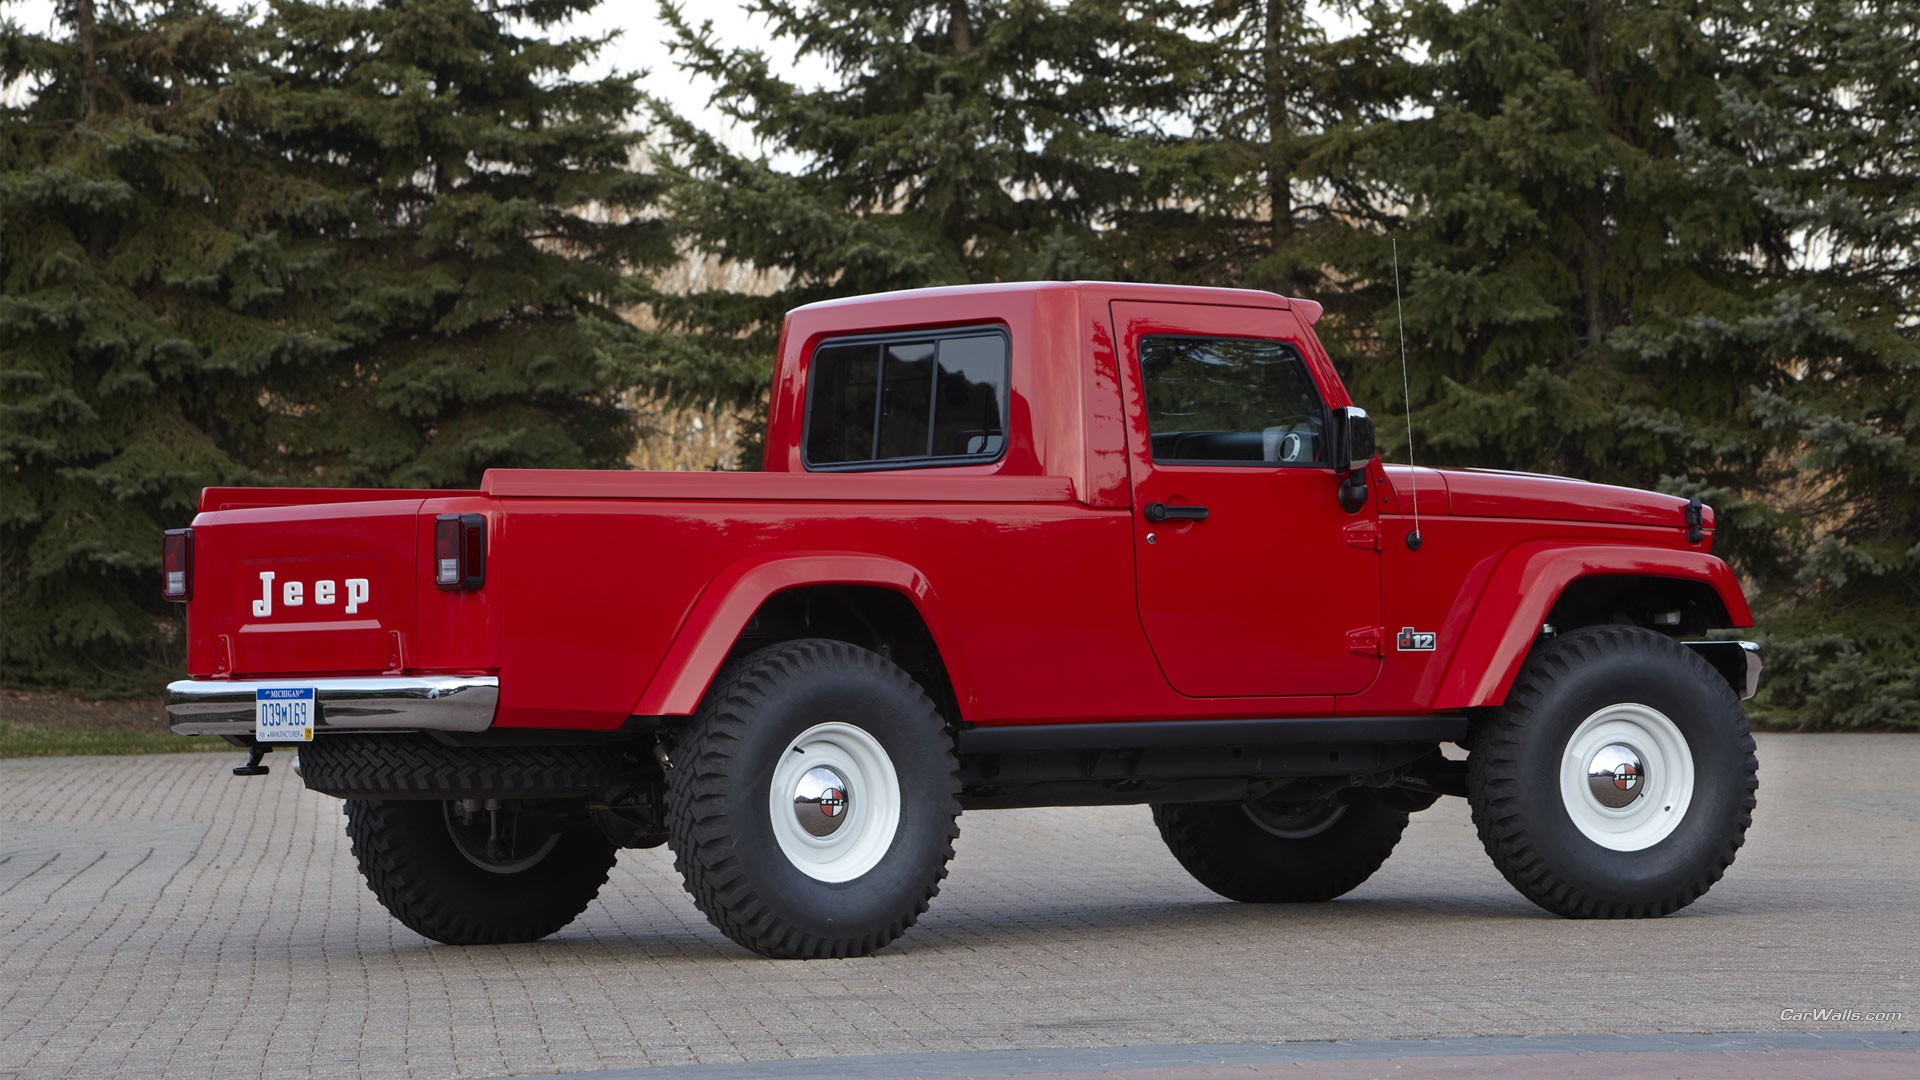 Jeep J 12 Concept Cars Red Cars 1920x1080